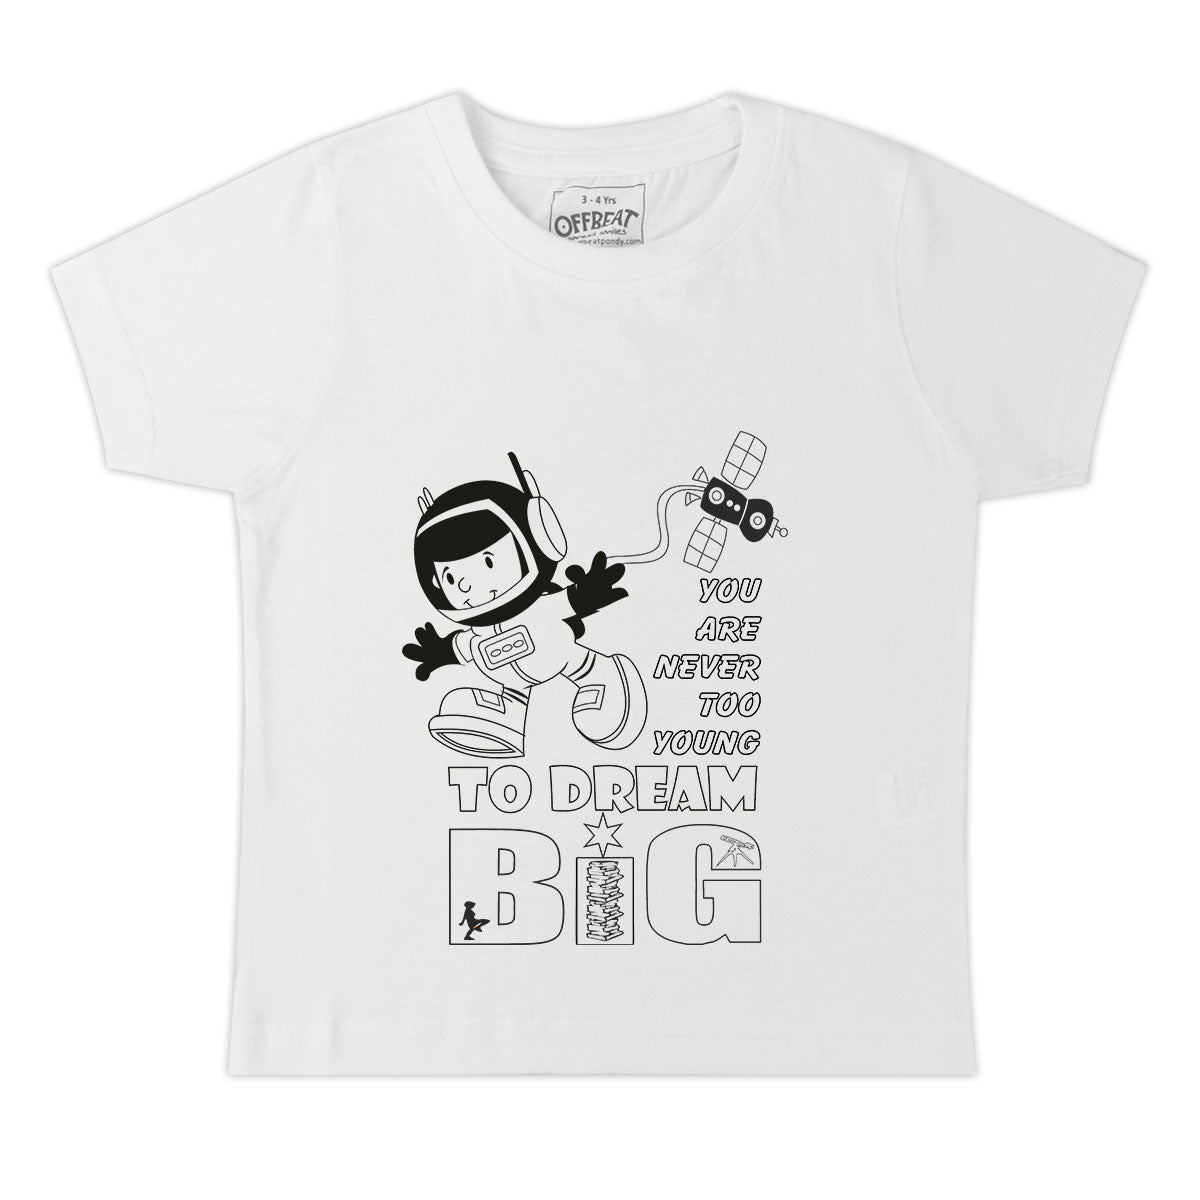 Never too young - Premium Round Neck Cotton Tees for Kids - White